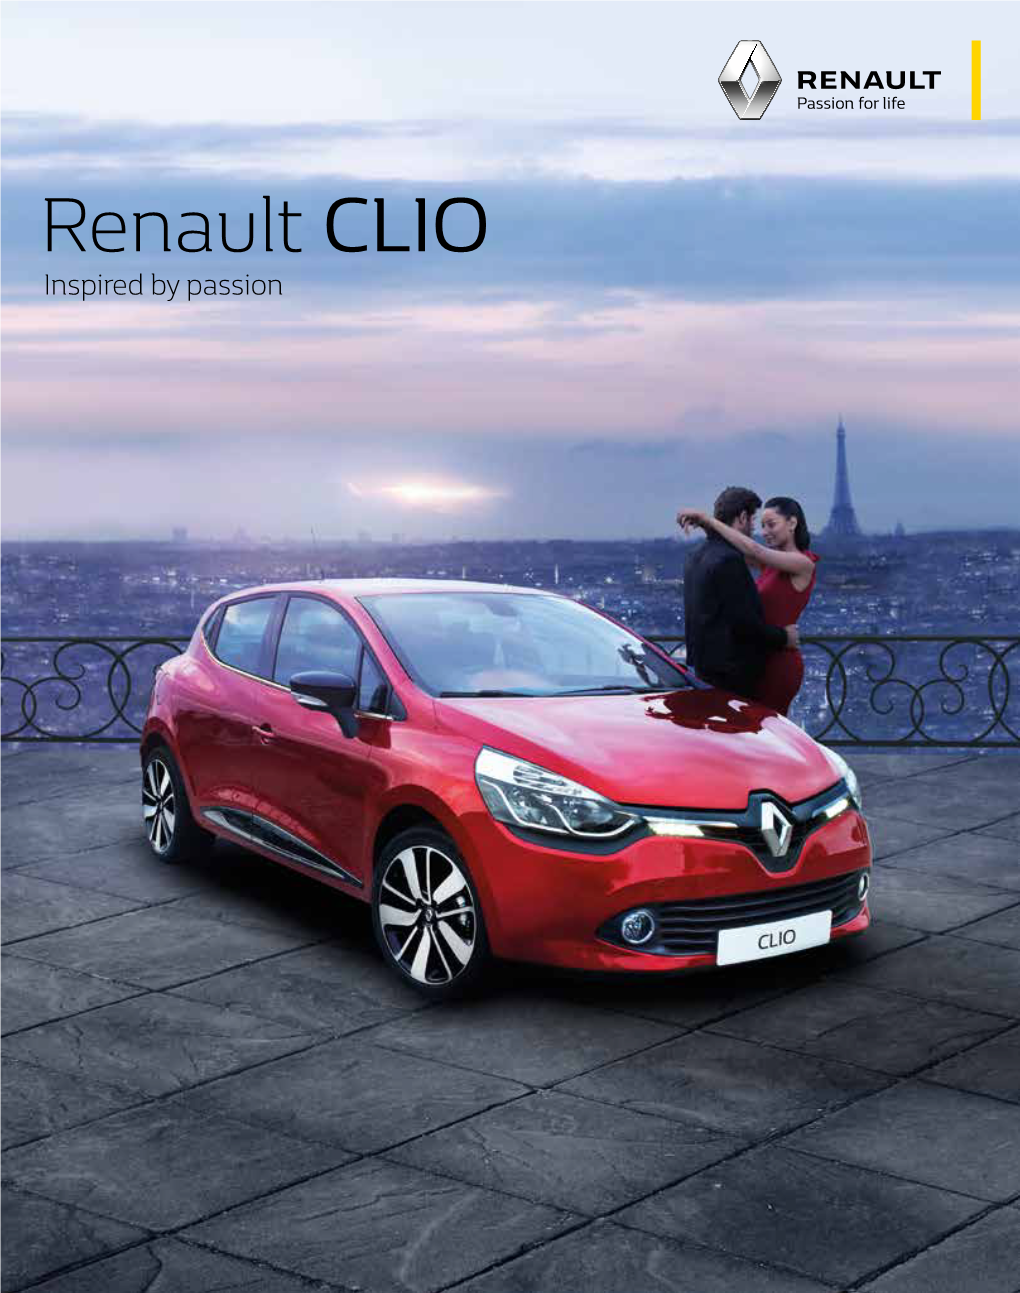 Renault CLIO Inspired by Passion the Clio and the Dezir Concept Car